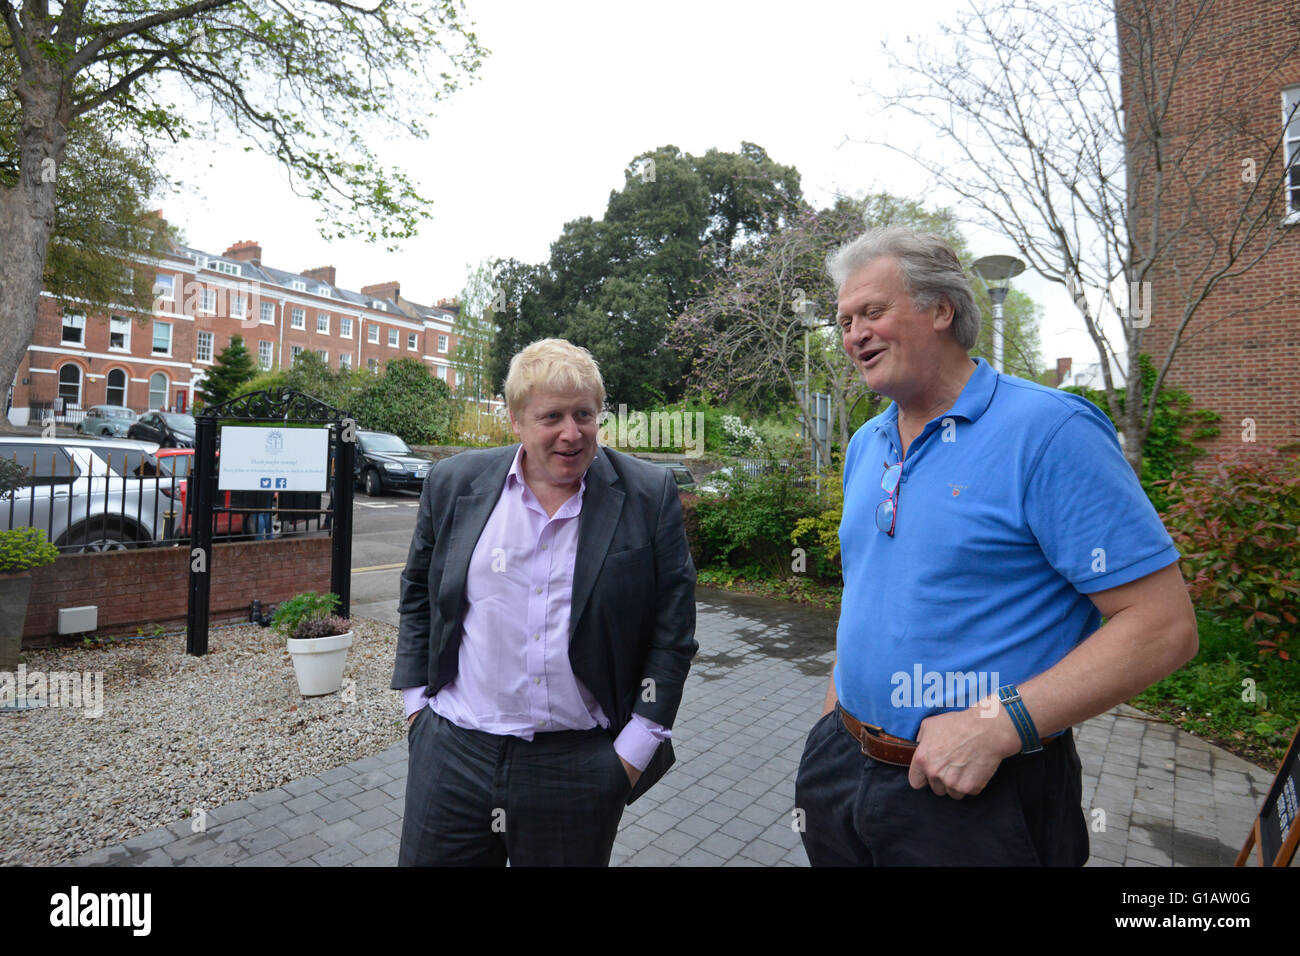 BORIS JOHNSON Meets TIM MARTIN on day of Brexit Announcement, Boris goes on to become Prime Minister after a series of donations from Tim Martin to the conservative party Stock Photo